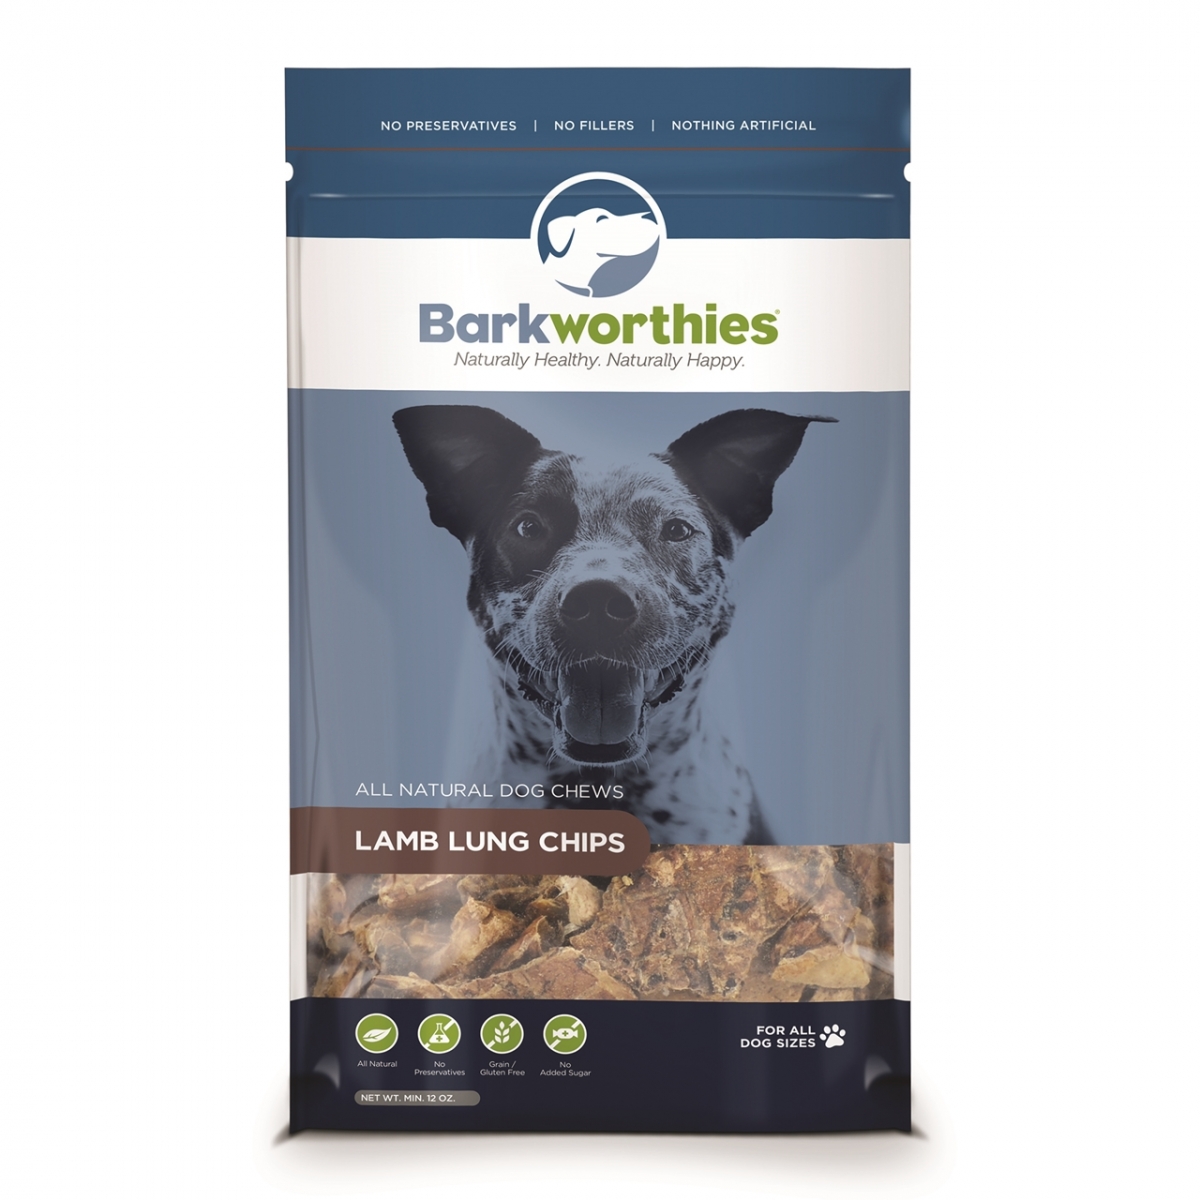 Barkworthies Lamb Lung Chips